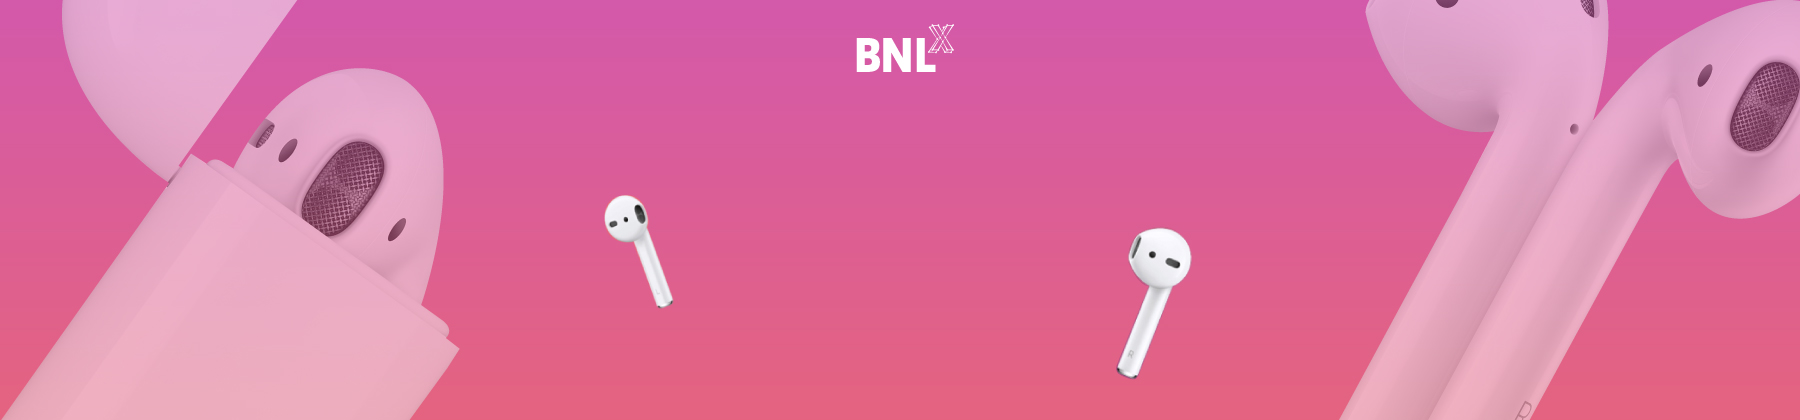 promo under 30 bnl payback airpods